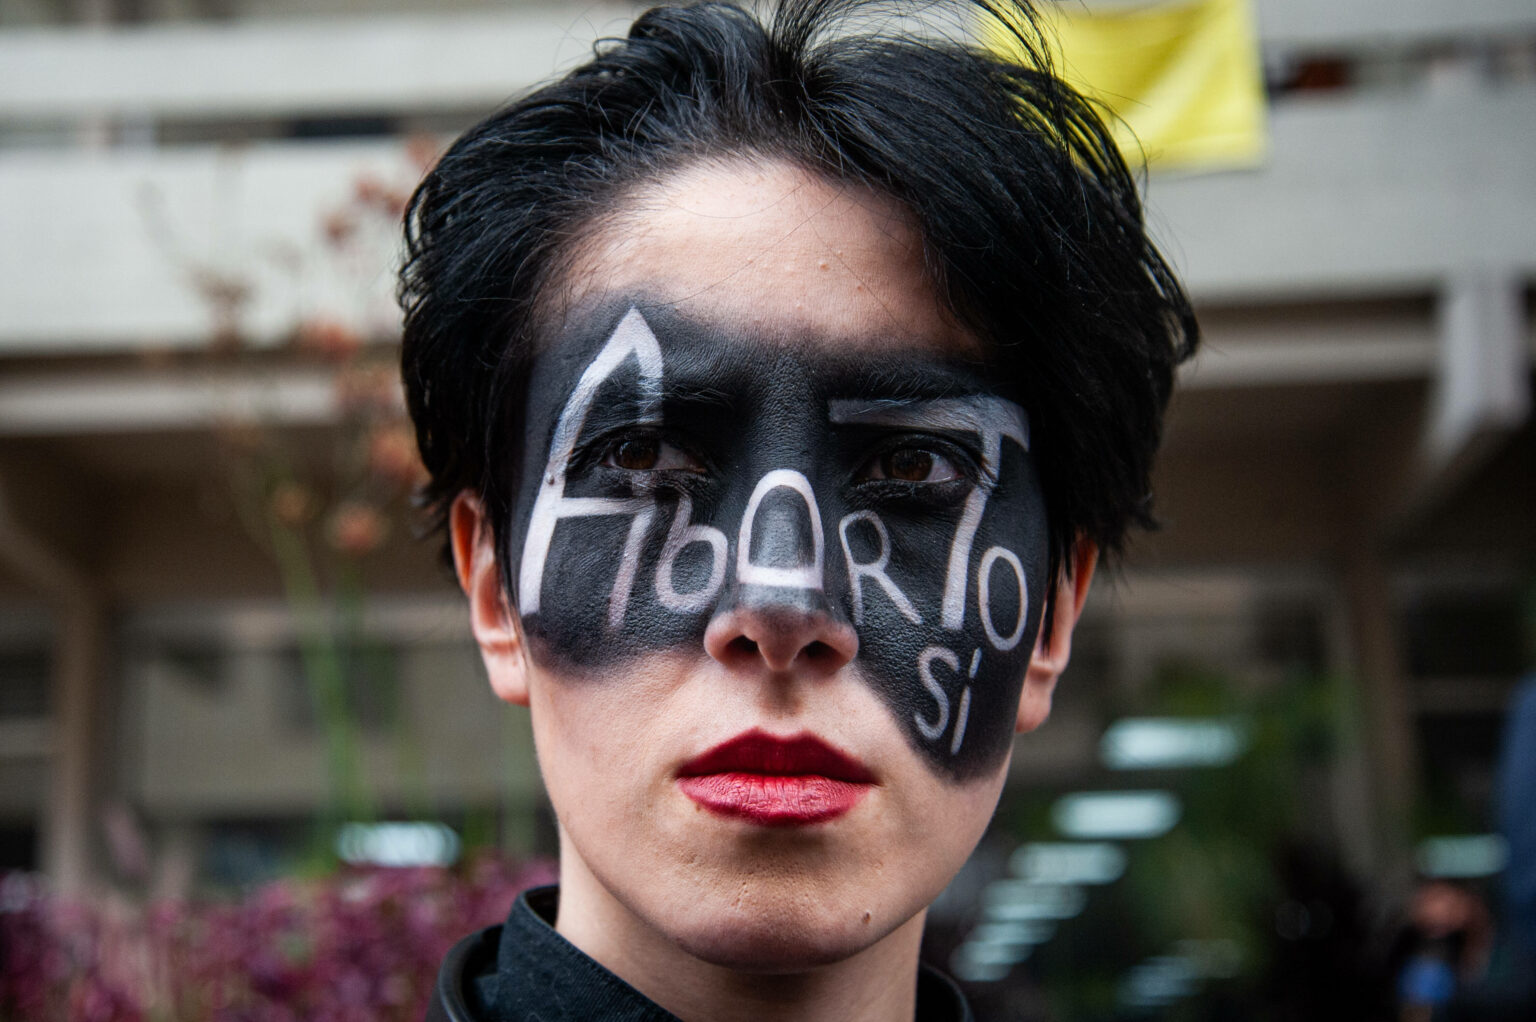 IMAGO / Zuma Wire / Chepa Beltran | Demonstration in support of the decriminalization of abortions in Colombia, in Bogota, Colombia. February 3, 2022.